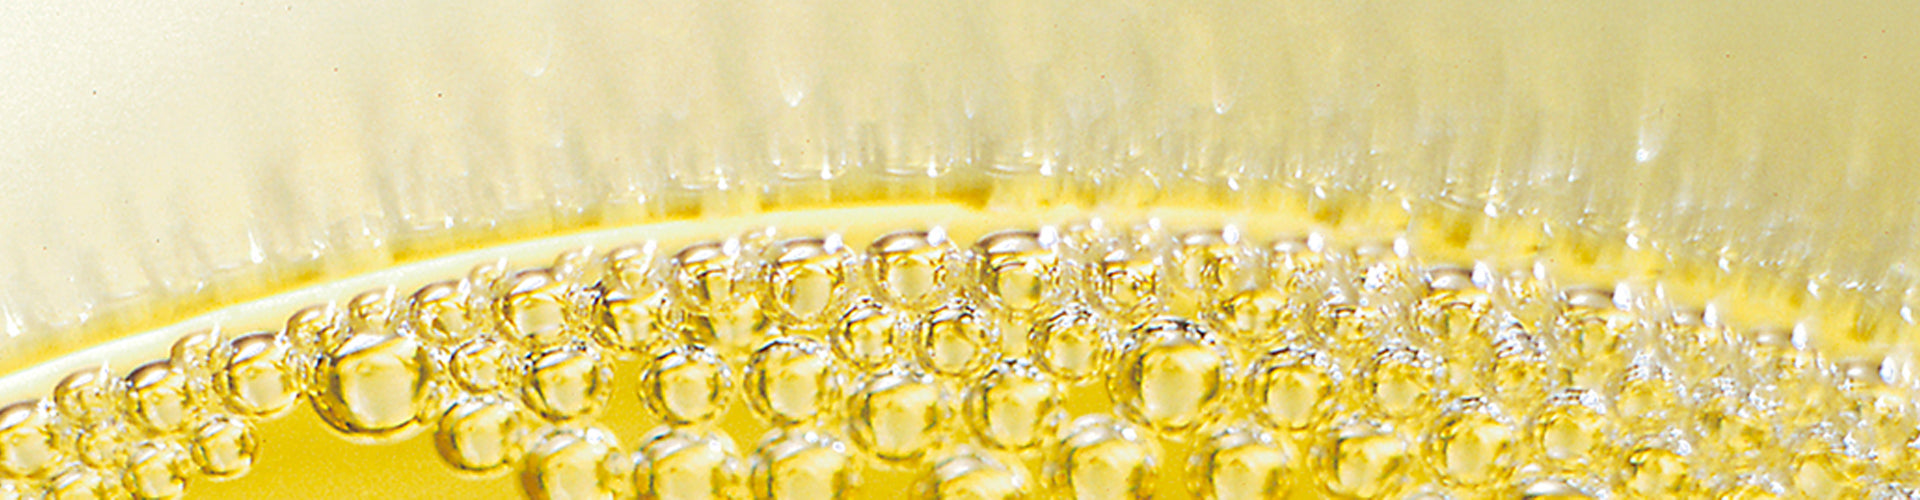 Super zoom in image of Champagne bubbles